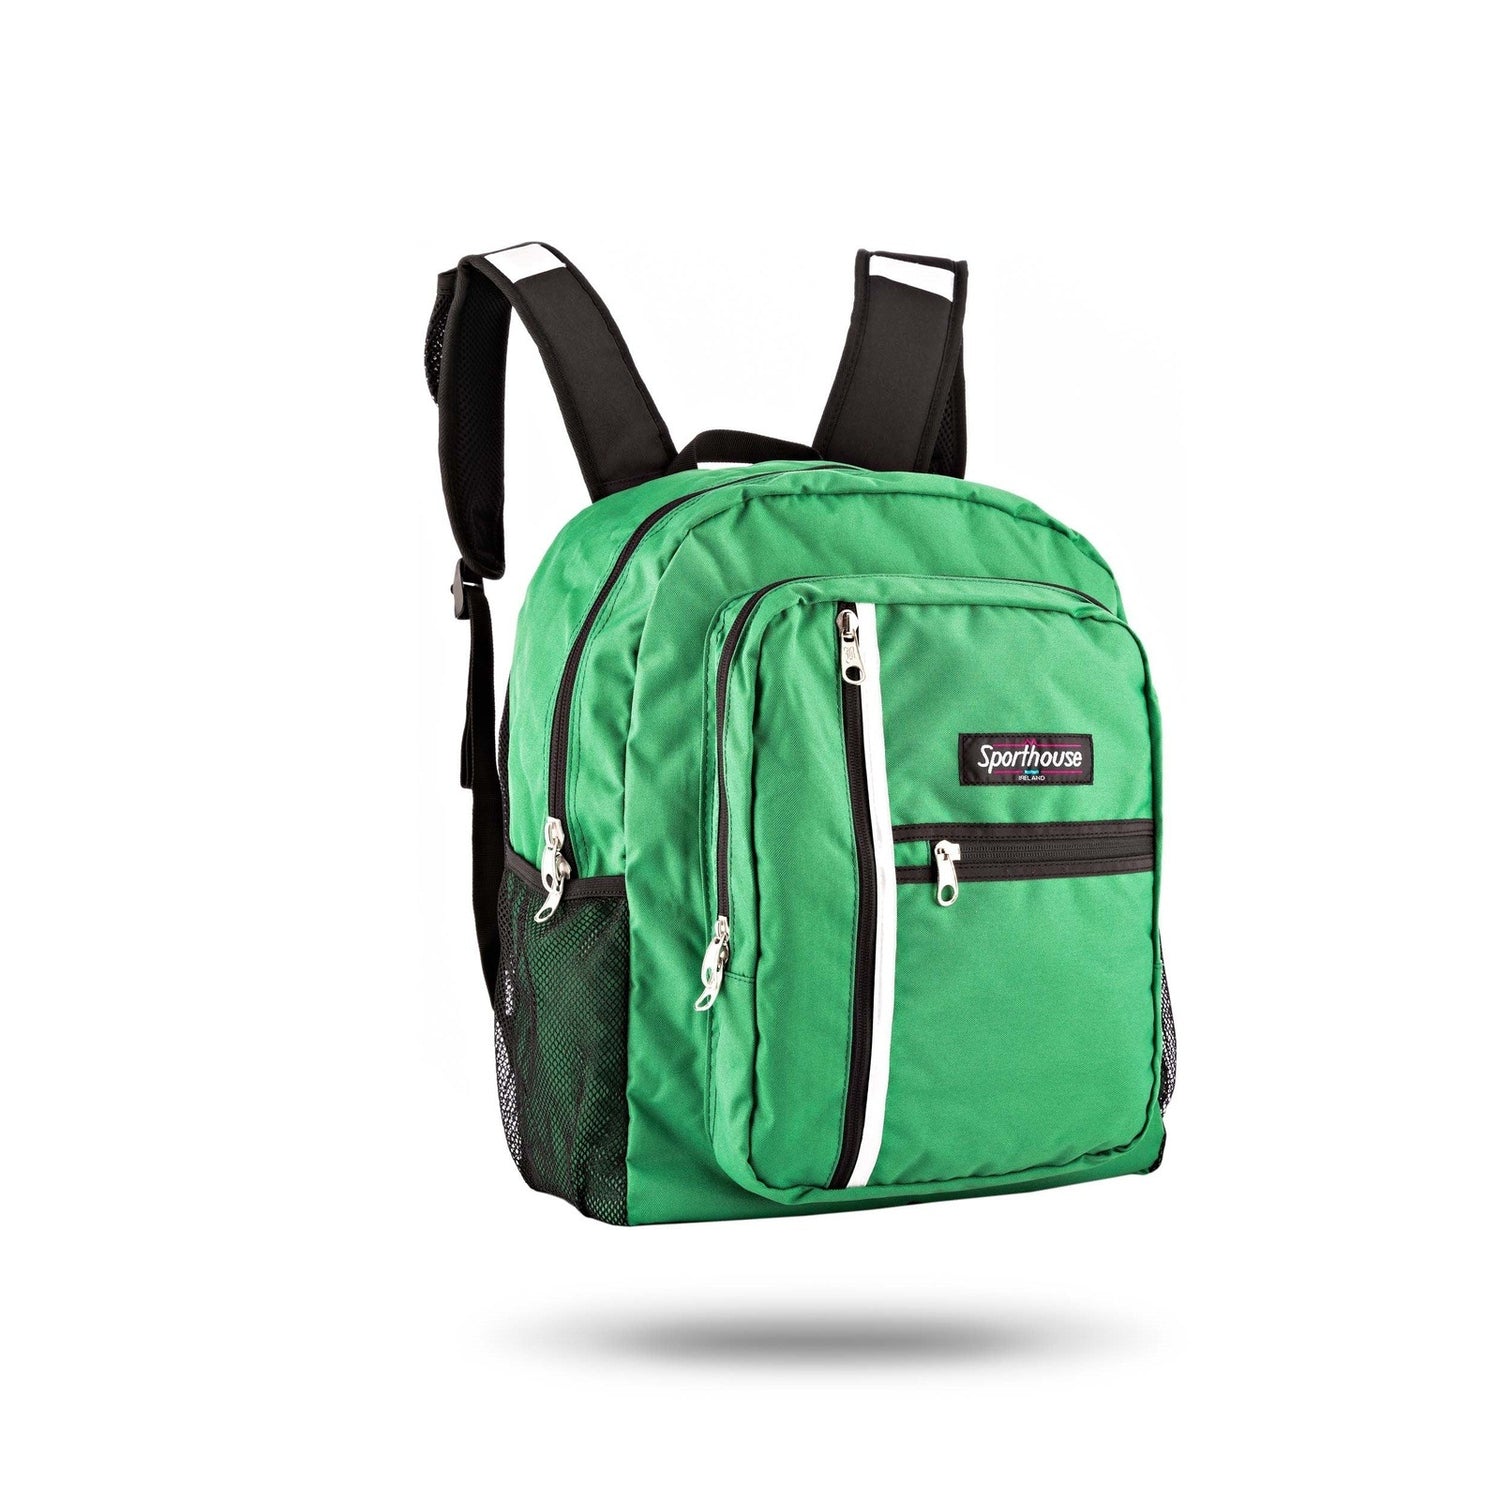 Sporthouse Student 2000 42L Backpack - Green 1 Shaws Department Stores